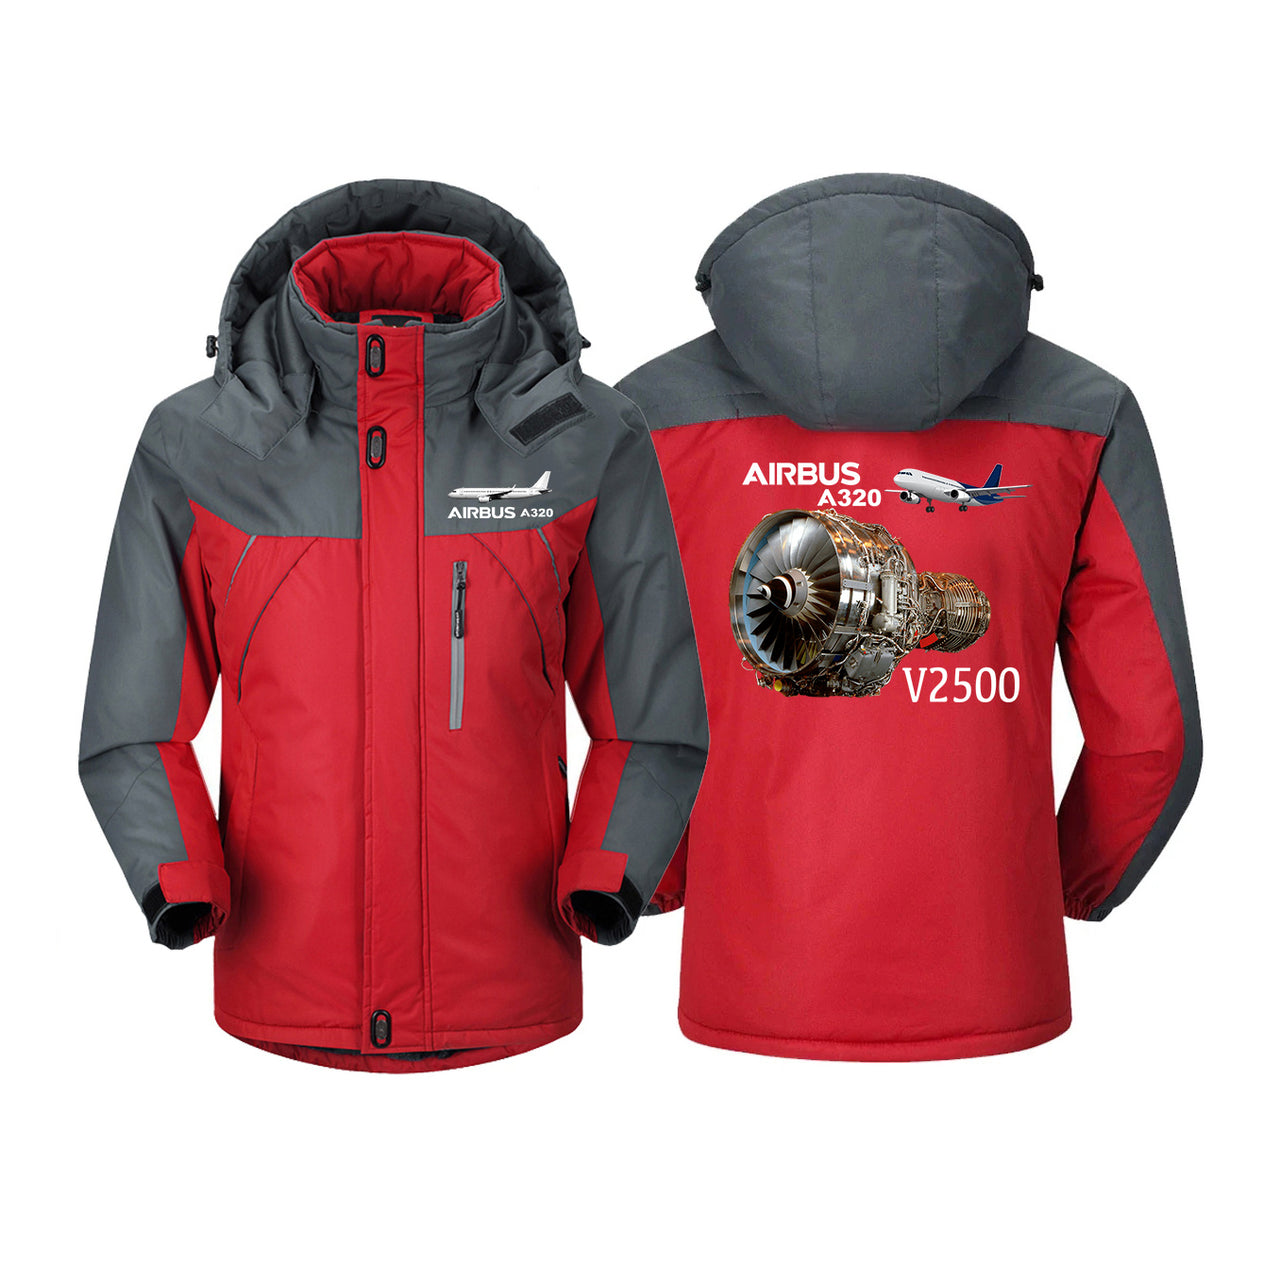 Airbus A320 & V2500 Engine Designed Thick Winter Jackets